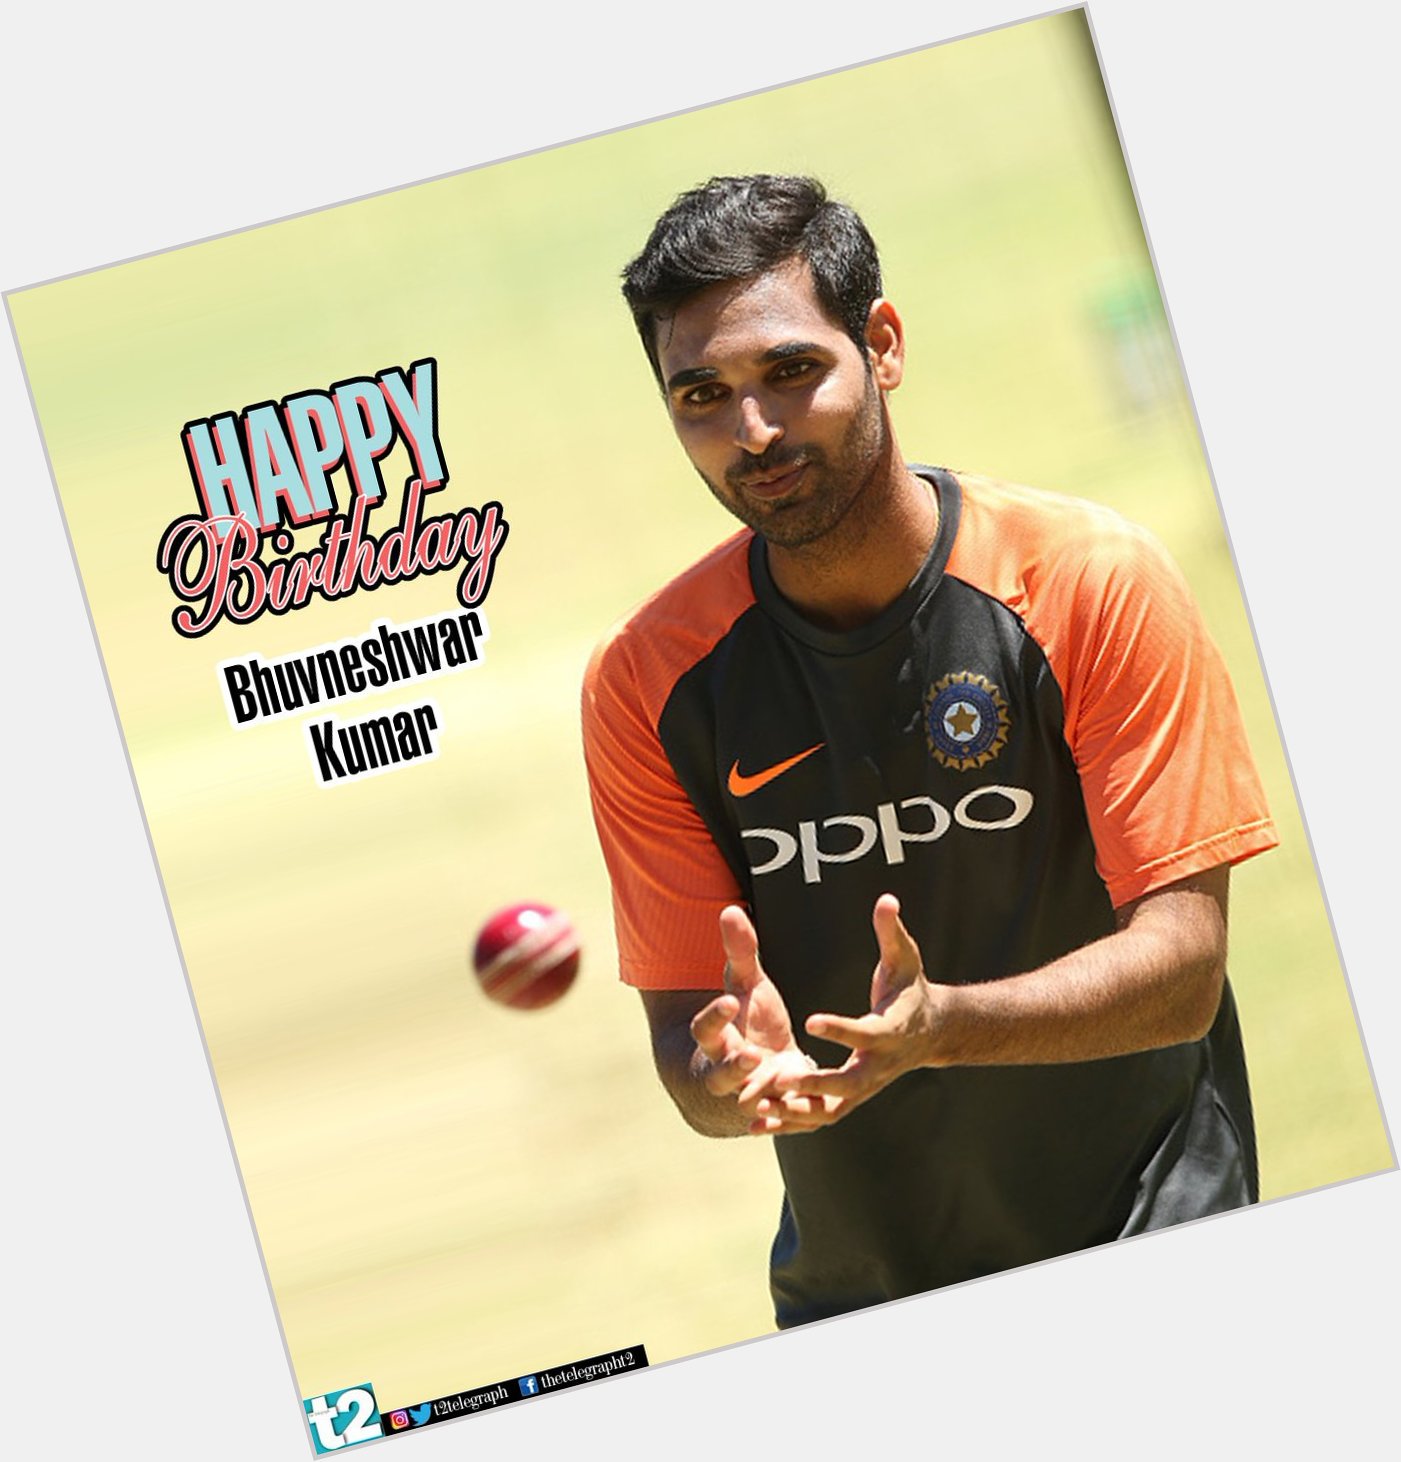 He is one to watch out for on the field! Happy birthday Bhuvneshwar Kumar. 